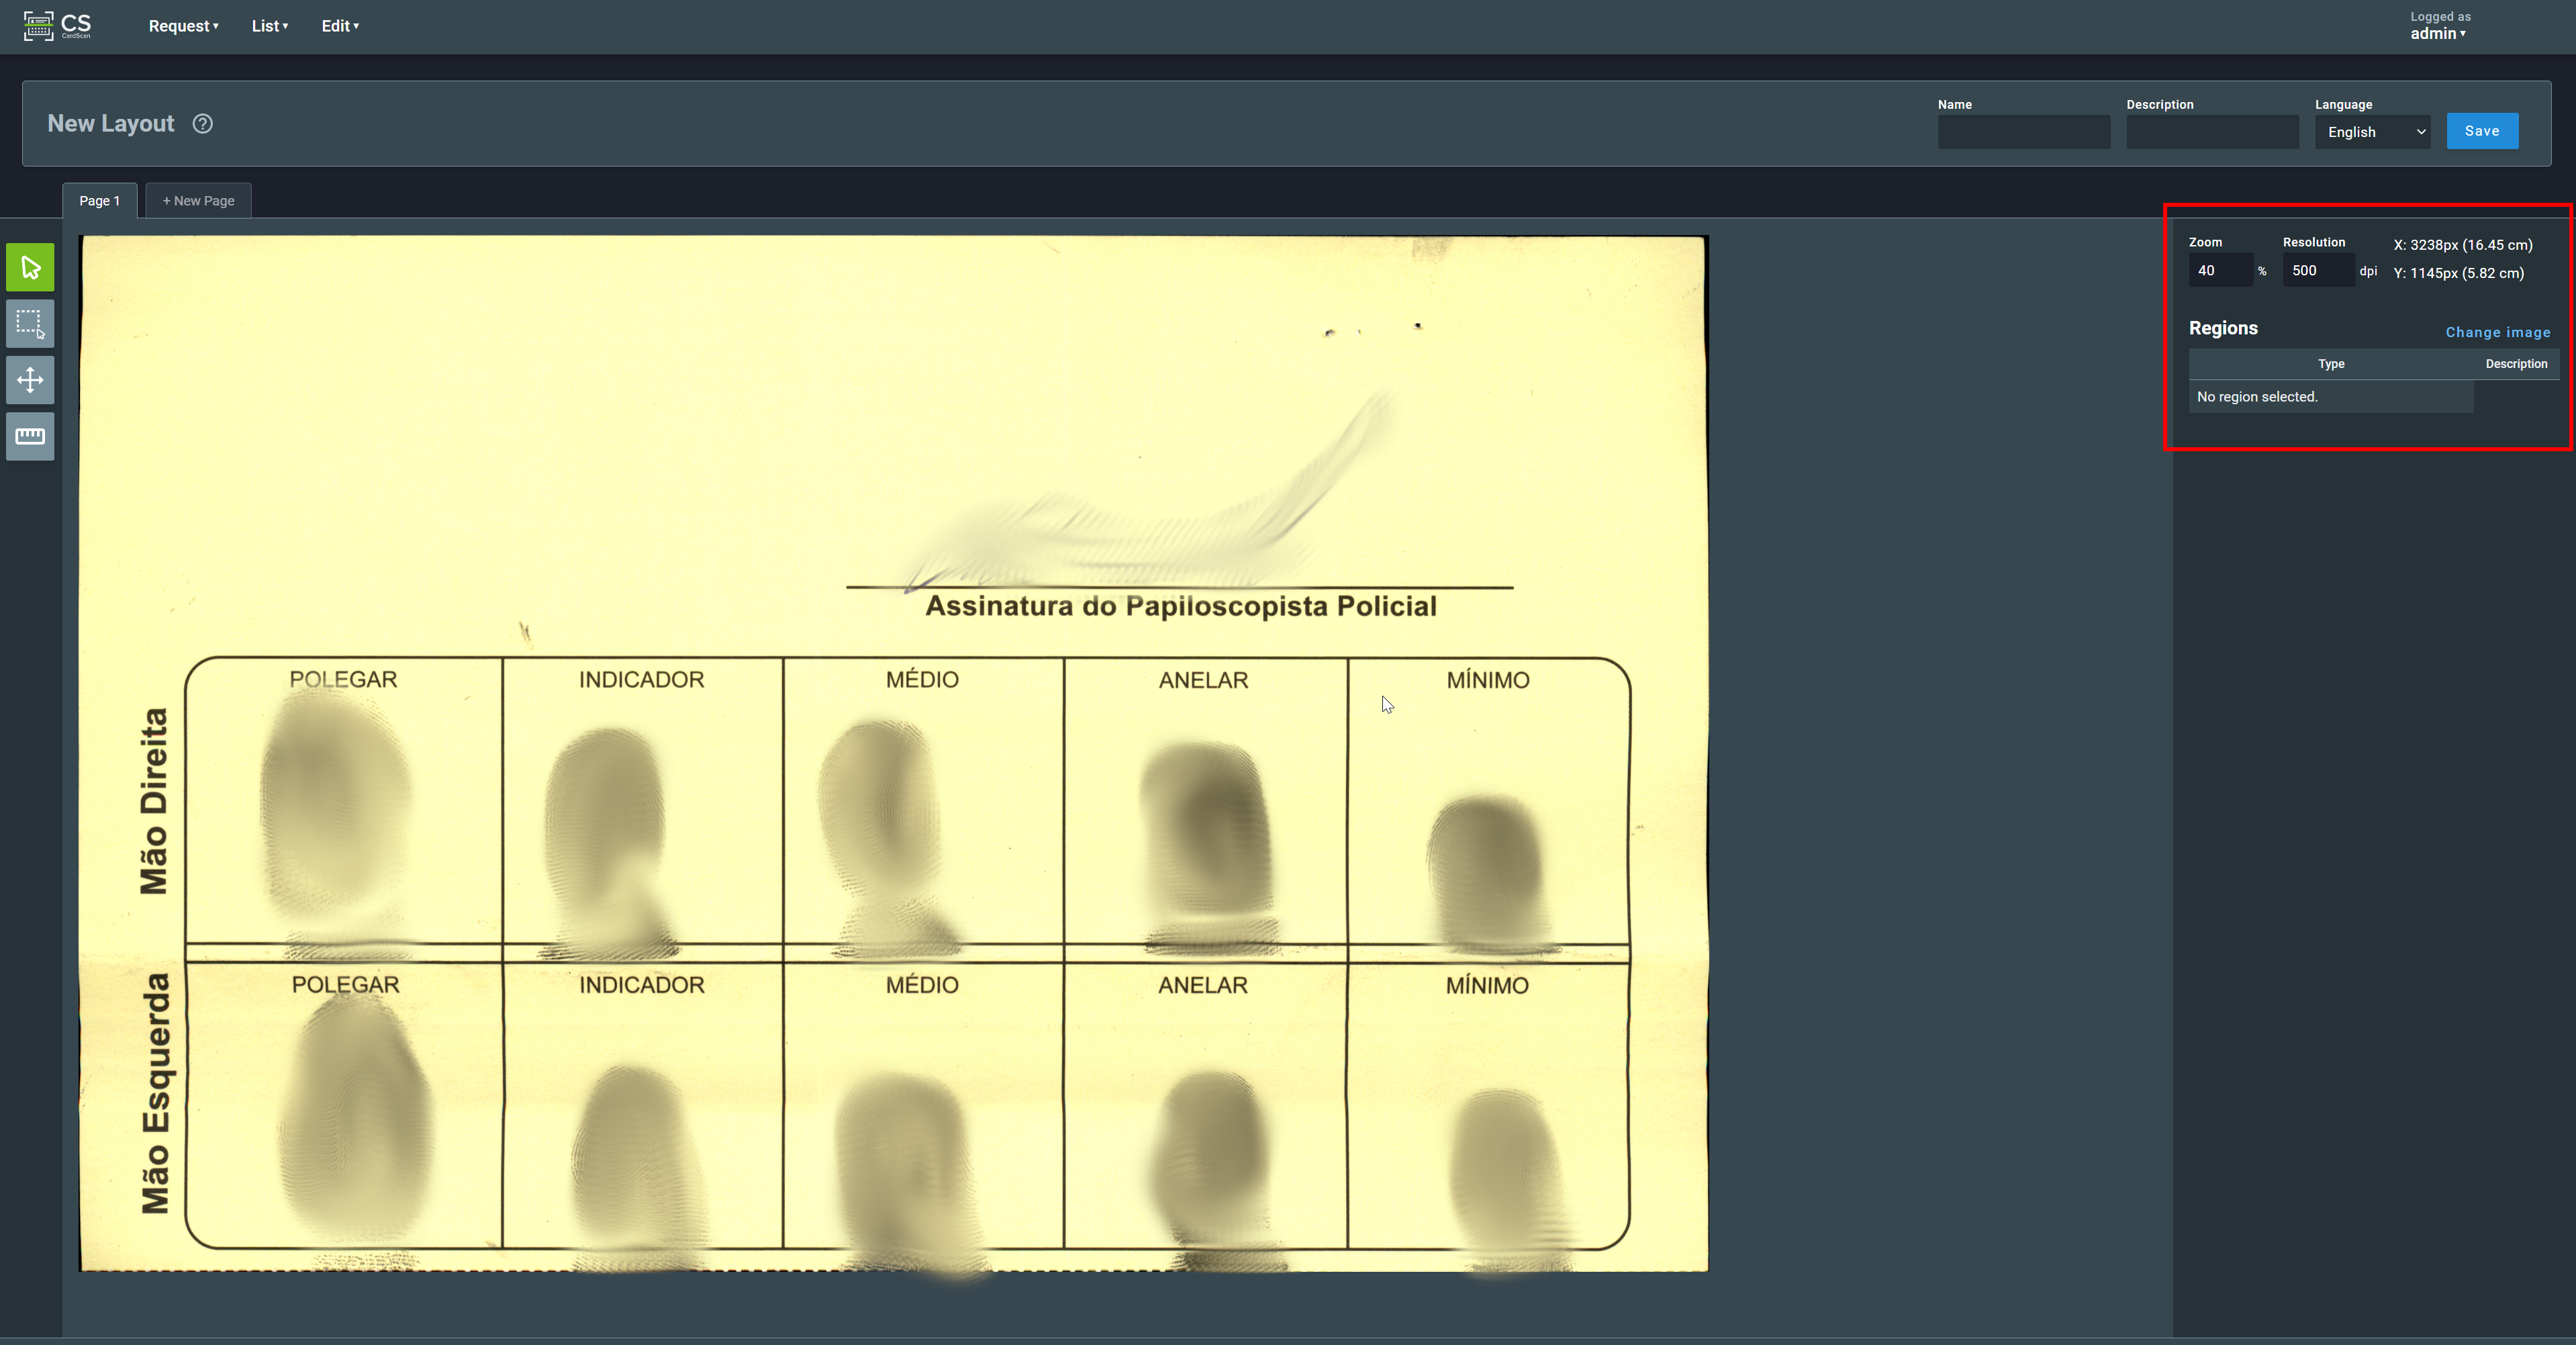 Imported Biometric Card Image highlighting resolution